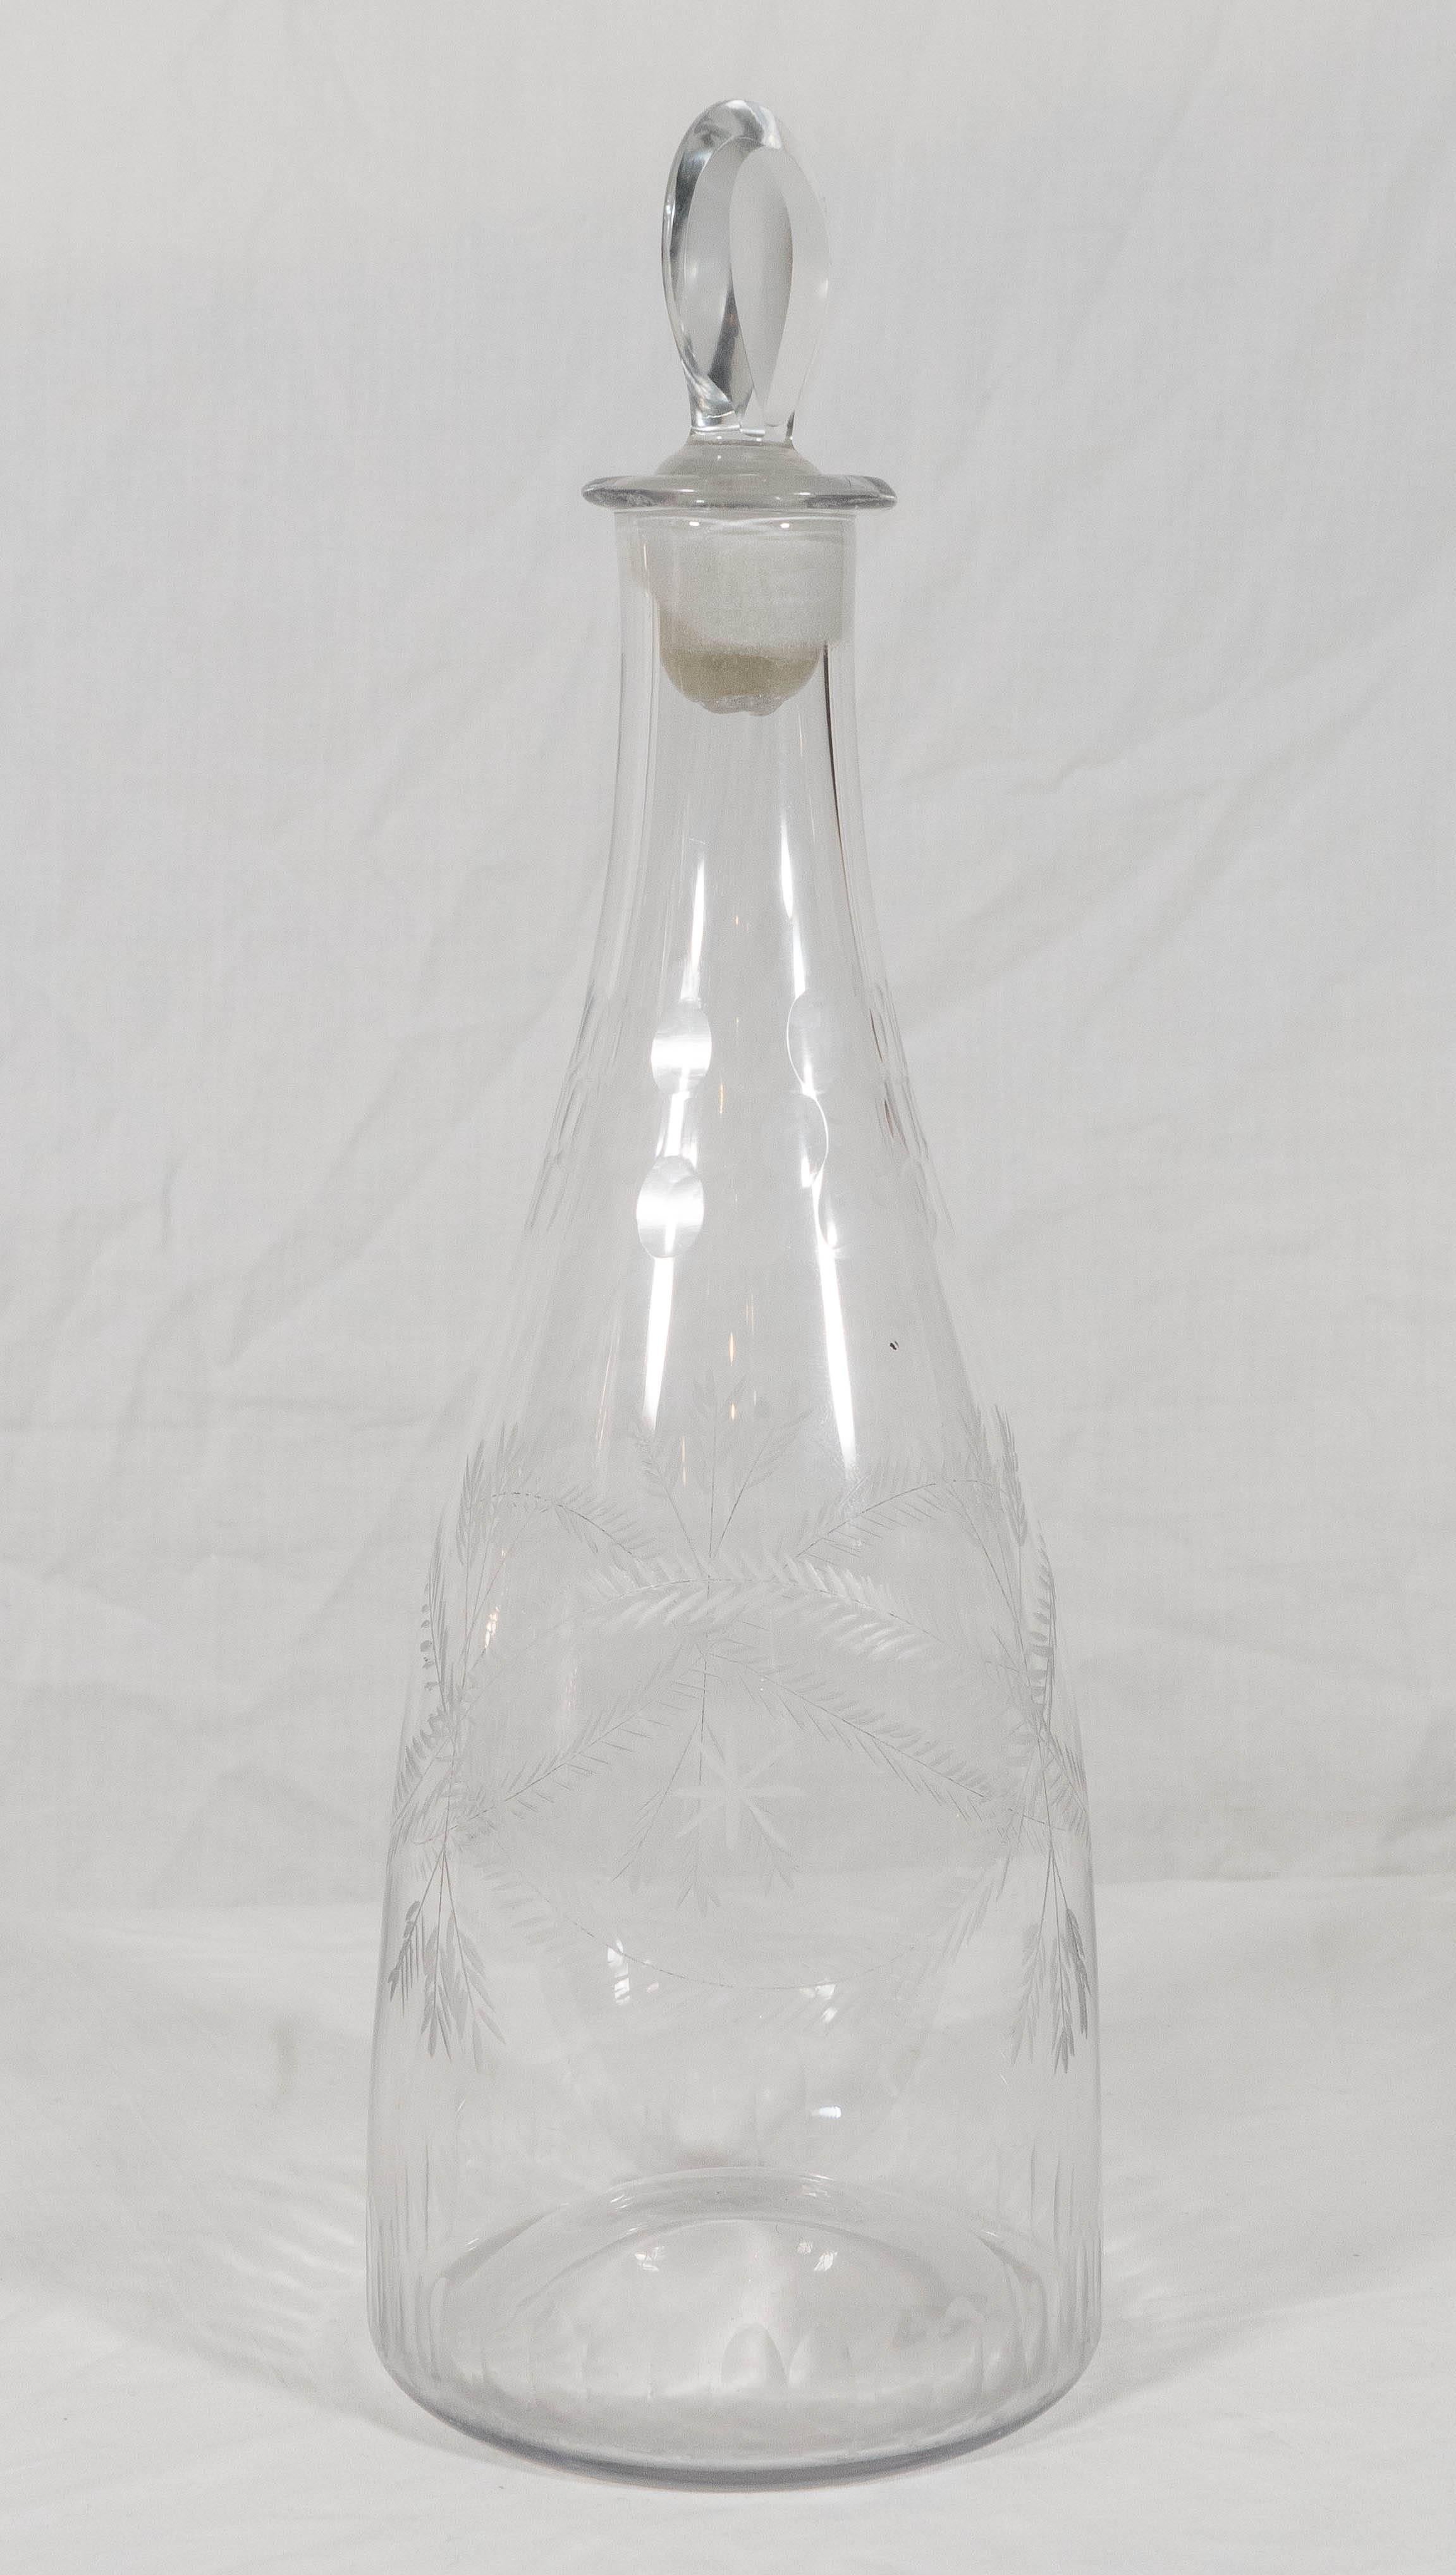 English 18th Century Engraved Glass Whisky Decanter